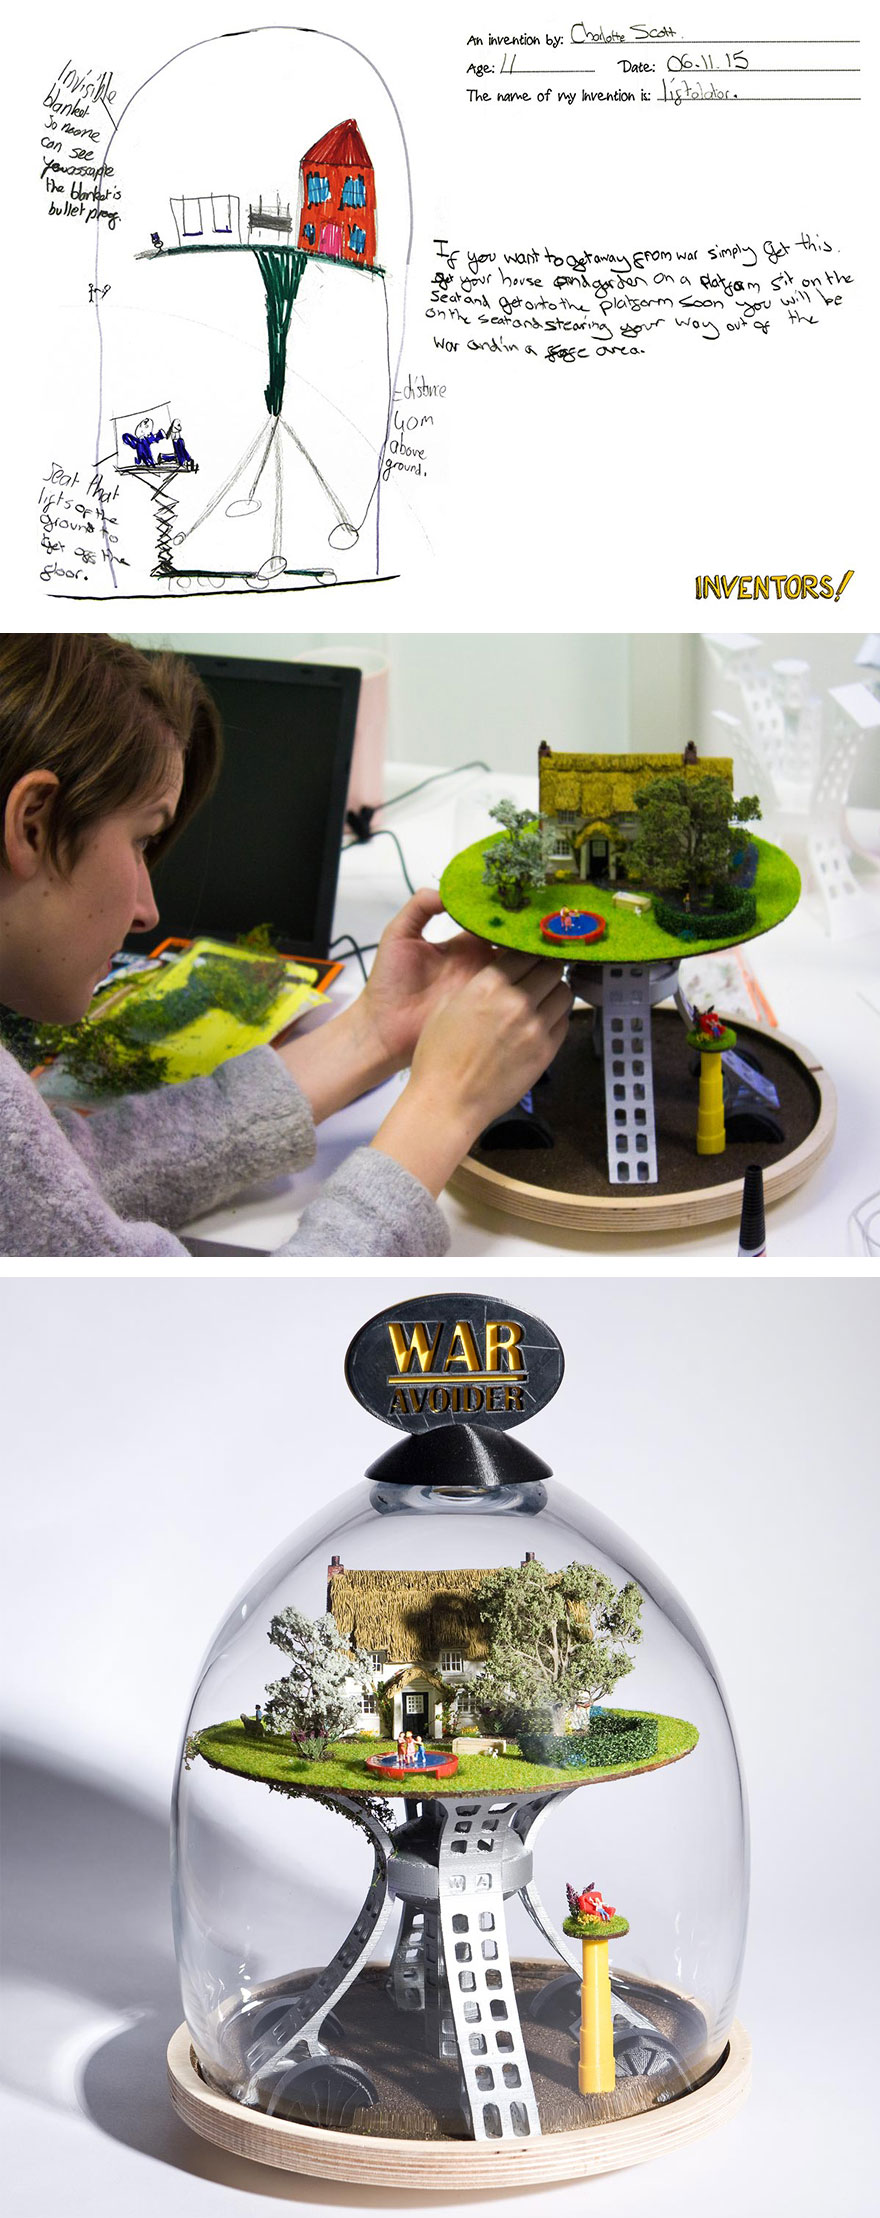 kids-inventions-turned-into-reality-inventors-project-dominic-wilcox-74__880